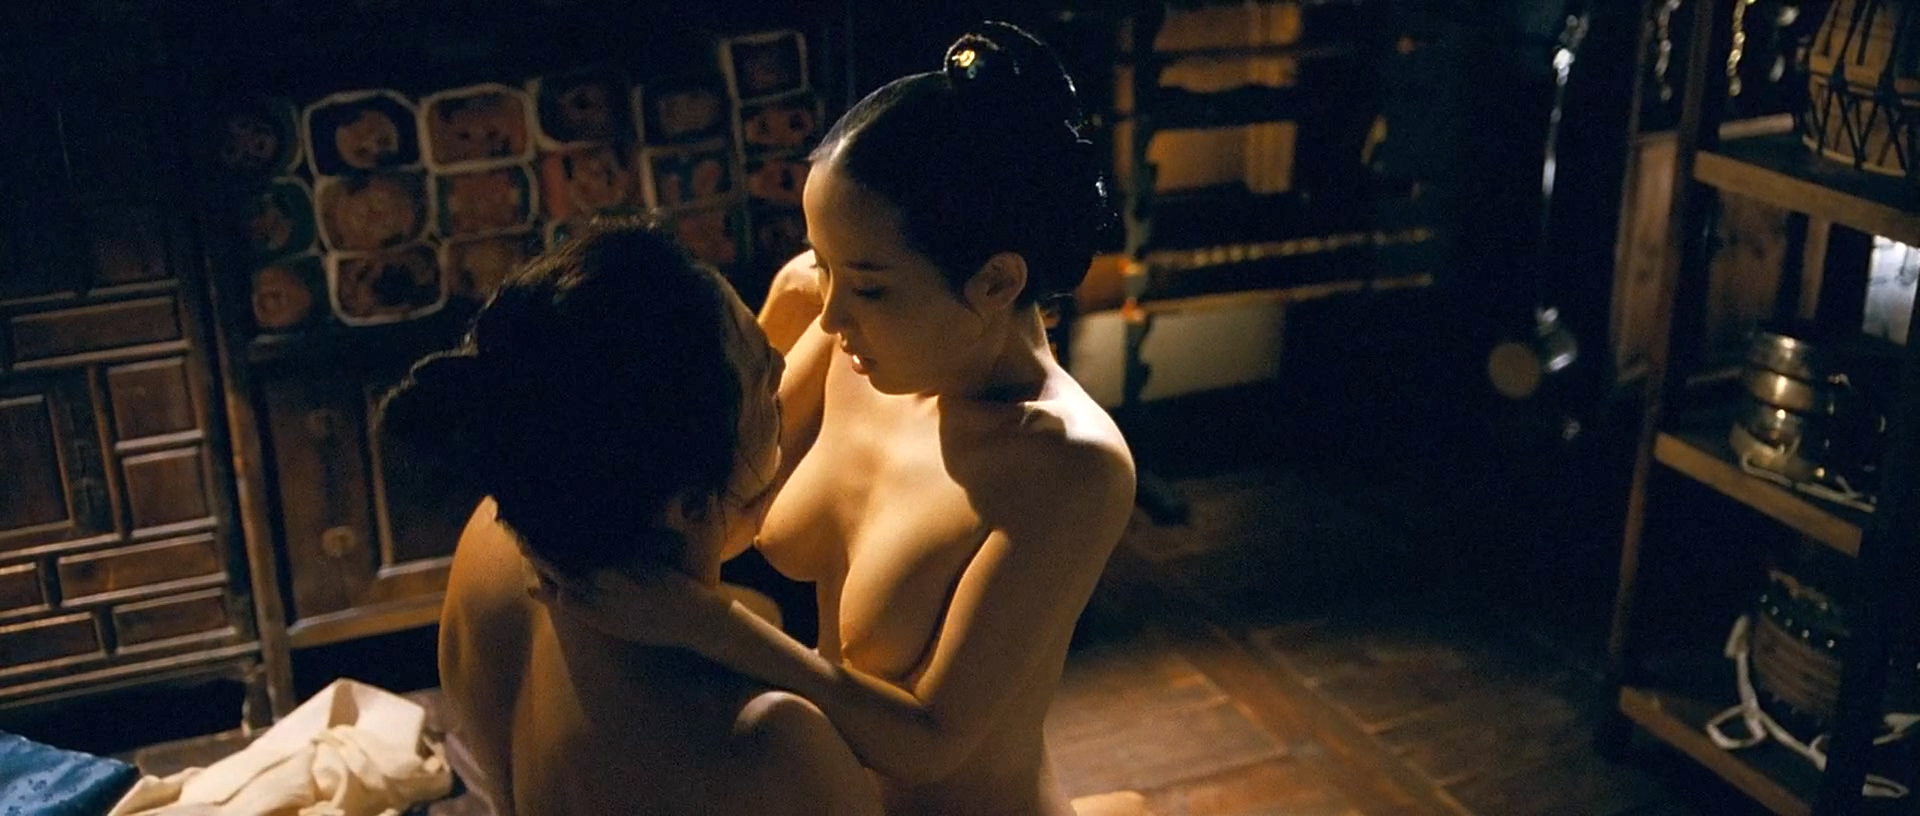 Cho Yeo-jeong (29 years) in nude sex scene from korean movie The Servant (a...